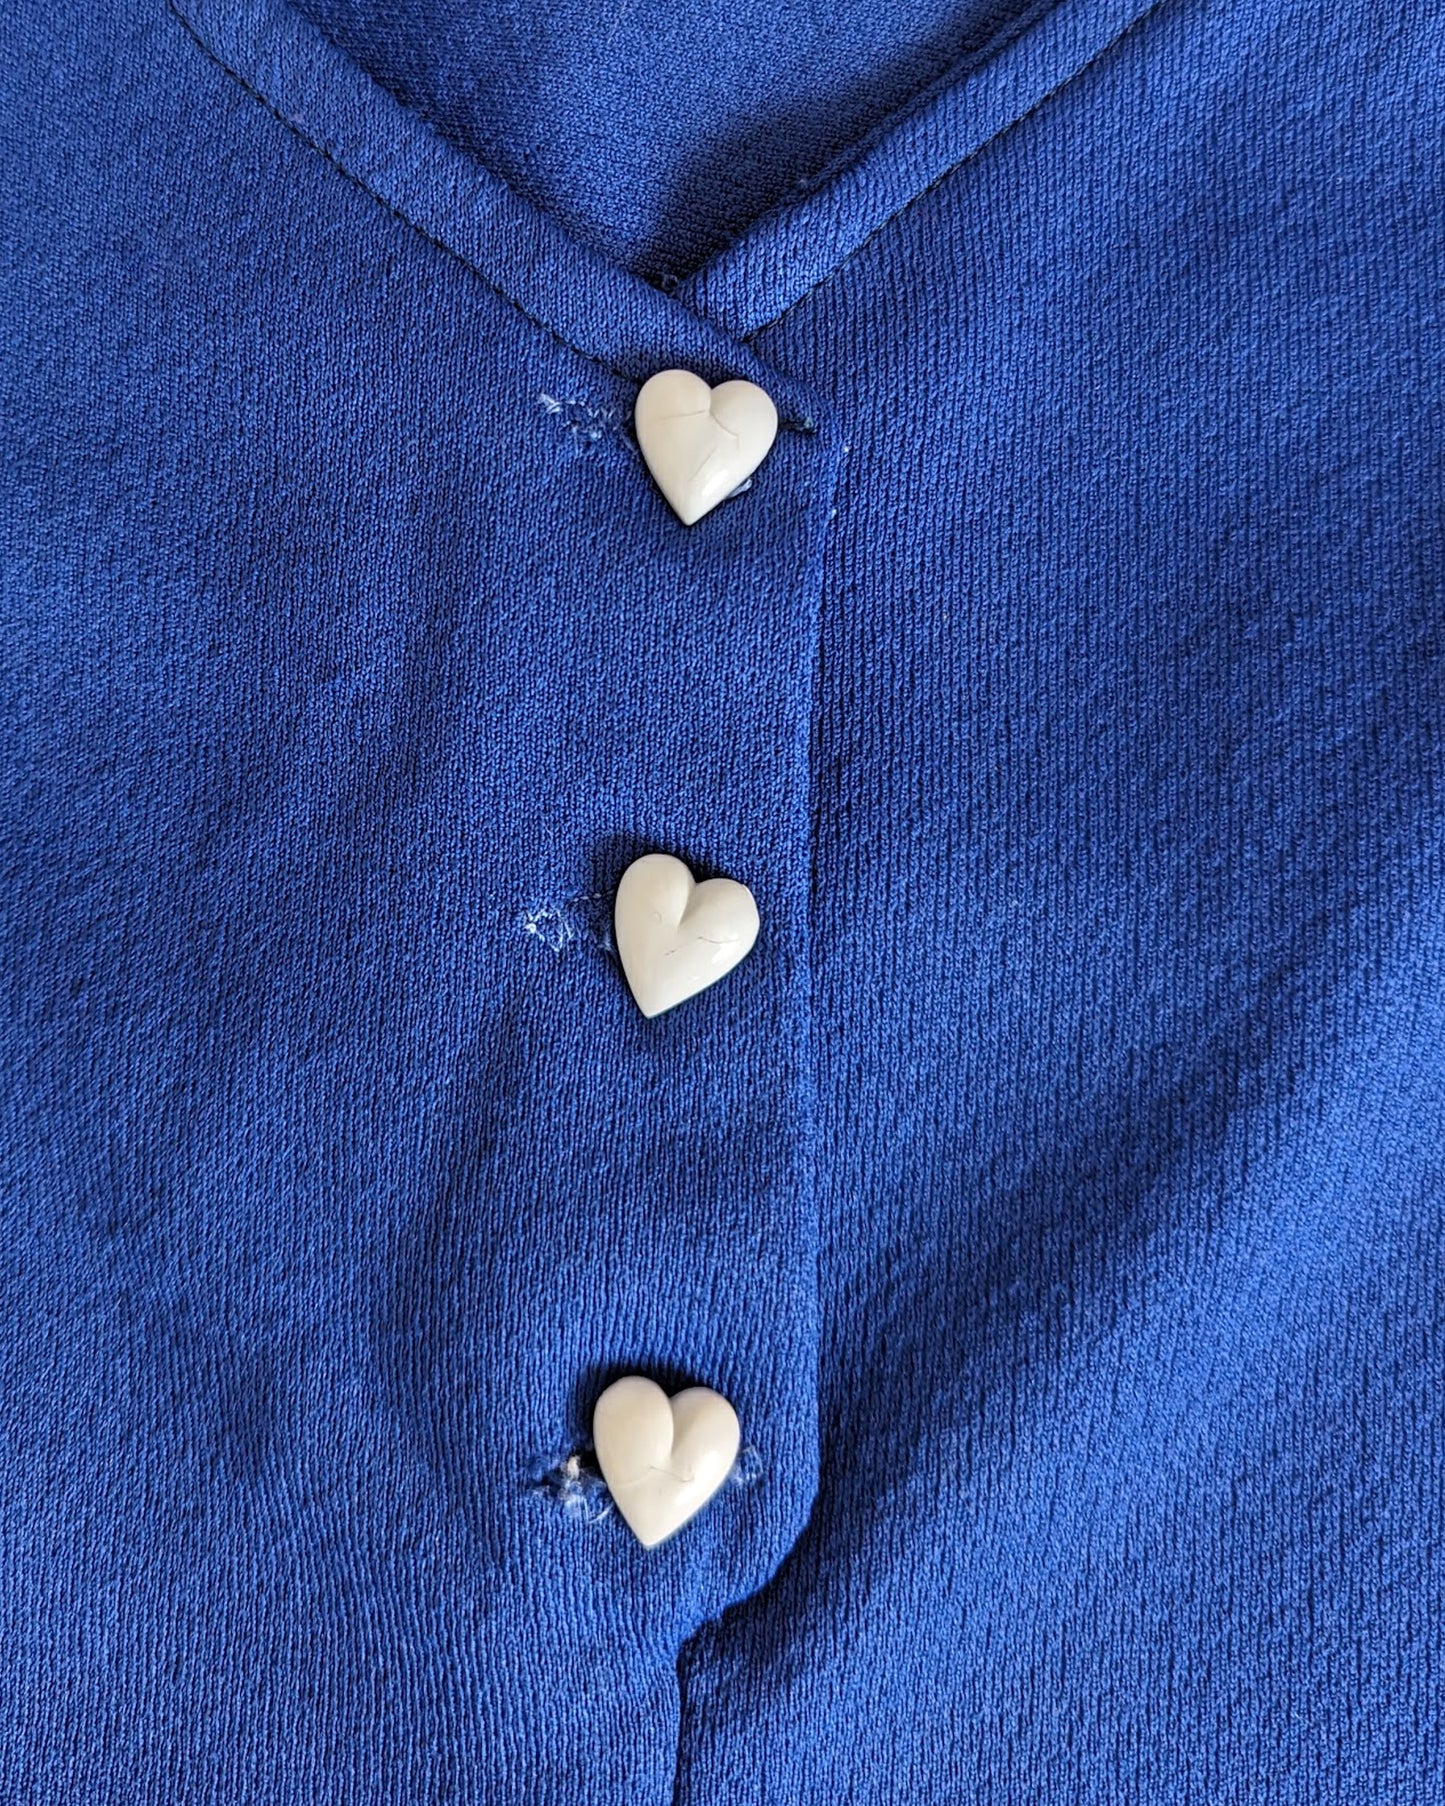 close up of the neckline and white heart buttons. there are small cracks on the buttons from age